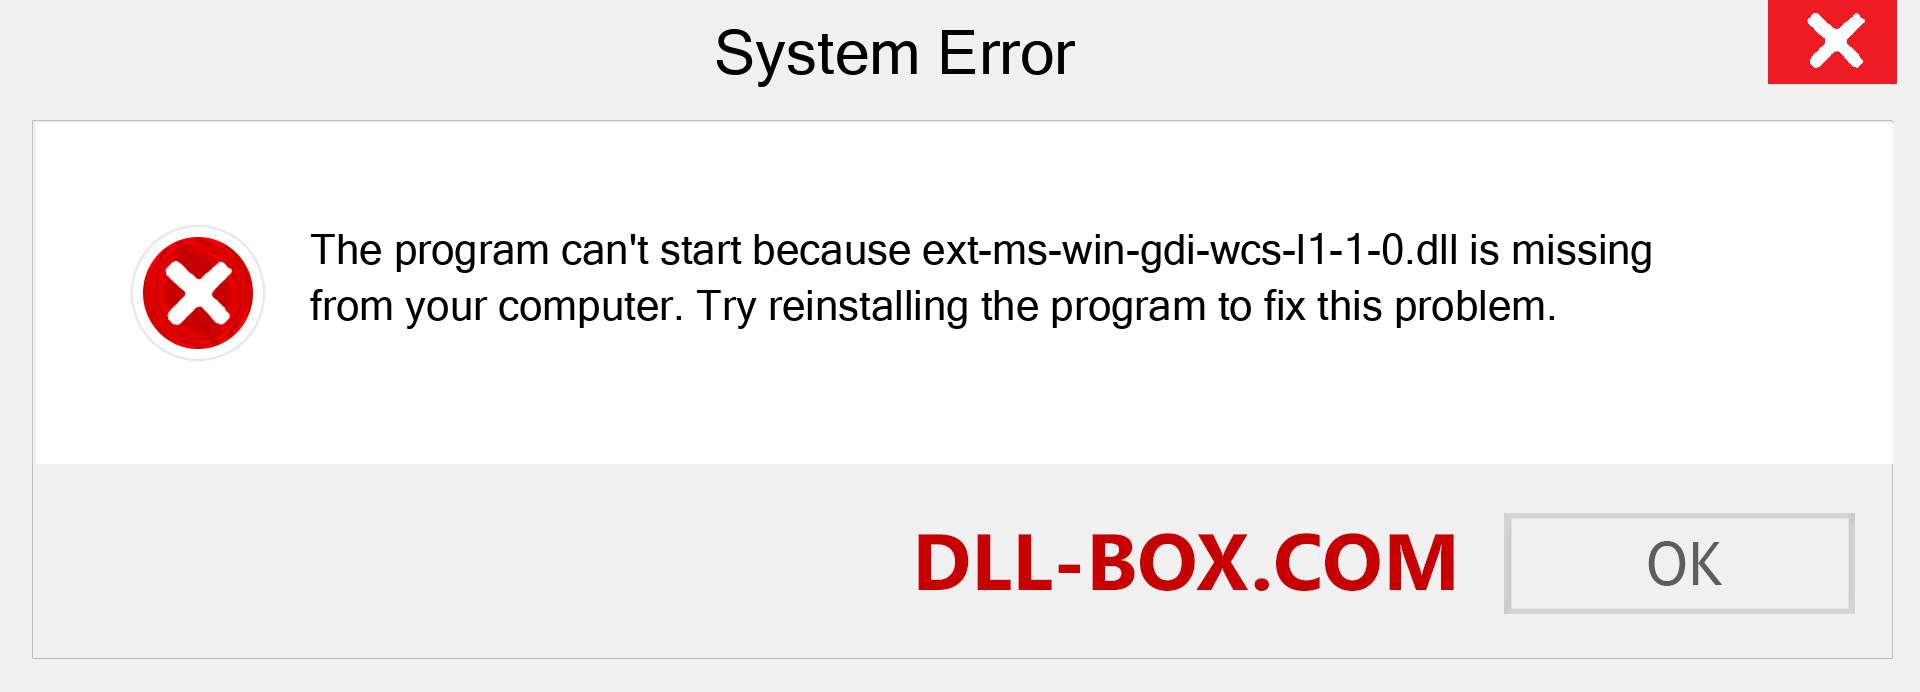  ext-ms-win-gdi-wcs-l1-1-0.dll file is missing?. Download for Windows 7, 8, 10 - Fix  ext-ms-win-gdi-wcs-l1-1-0 dll Missing Error on Windows, photos, images